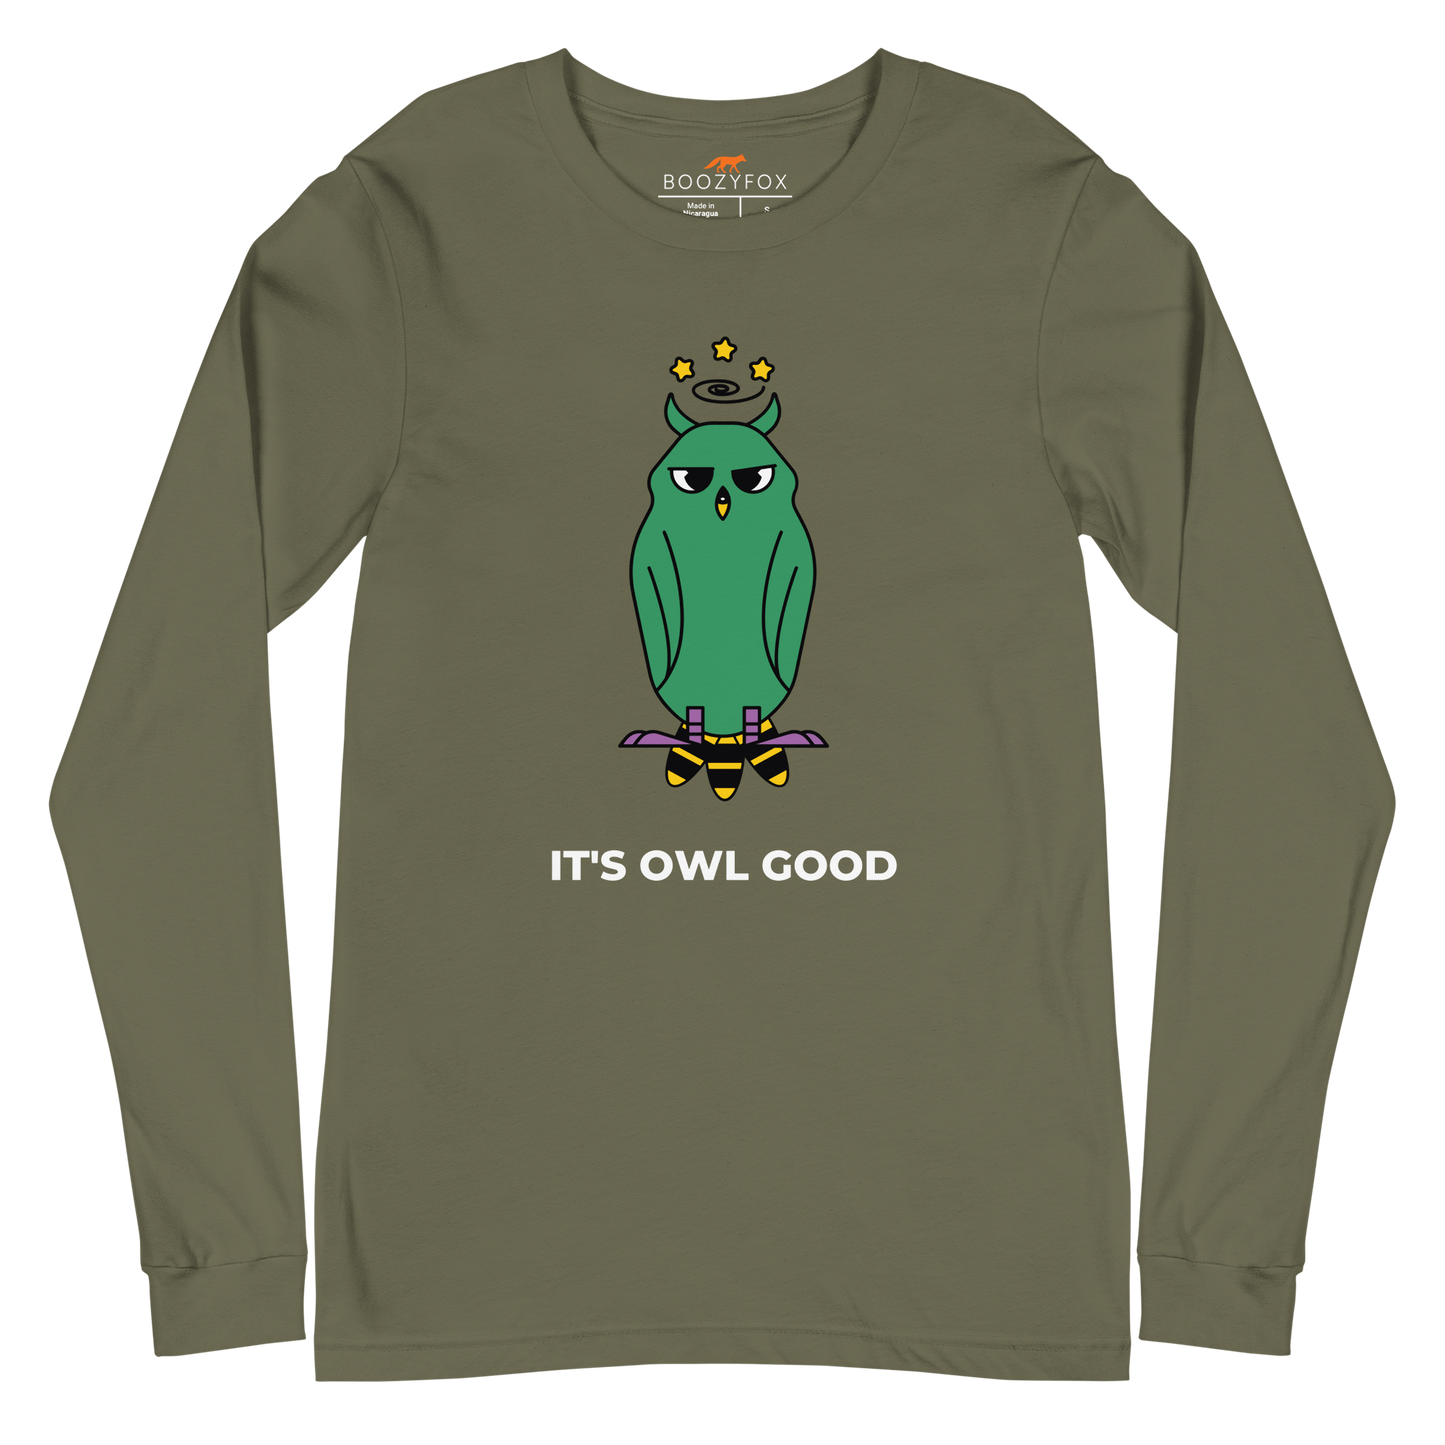 Military Green Owl Long Sleeve Tee featuring a captivating It's Owl Good graphic on the chest - Funny Owl Long Sleeve Graphic Tees - Boozy Fox